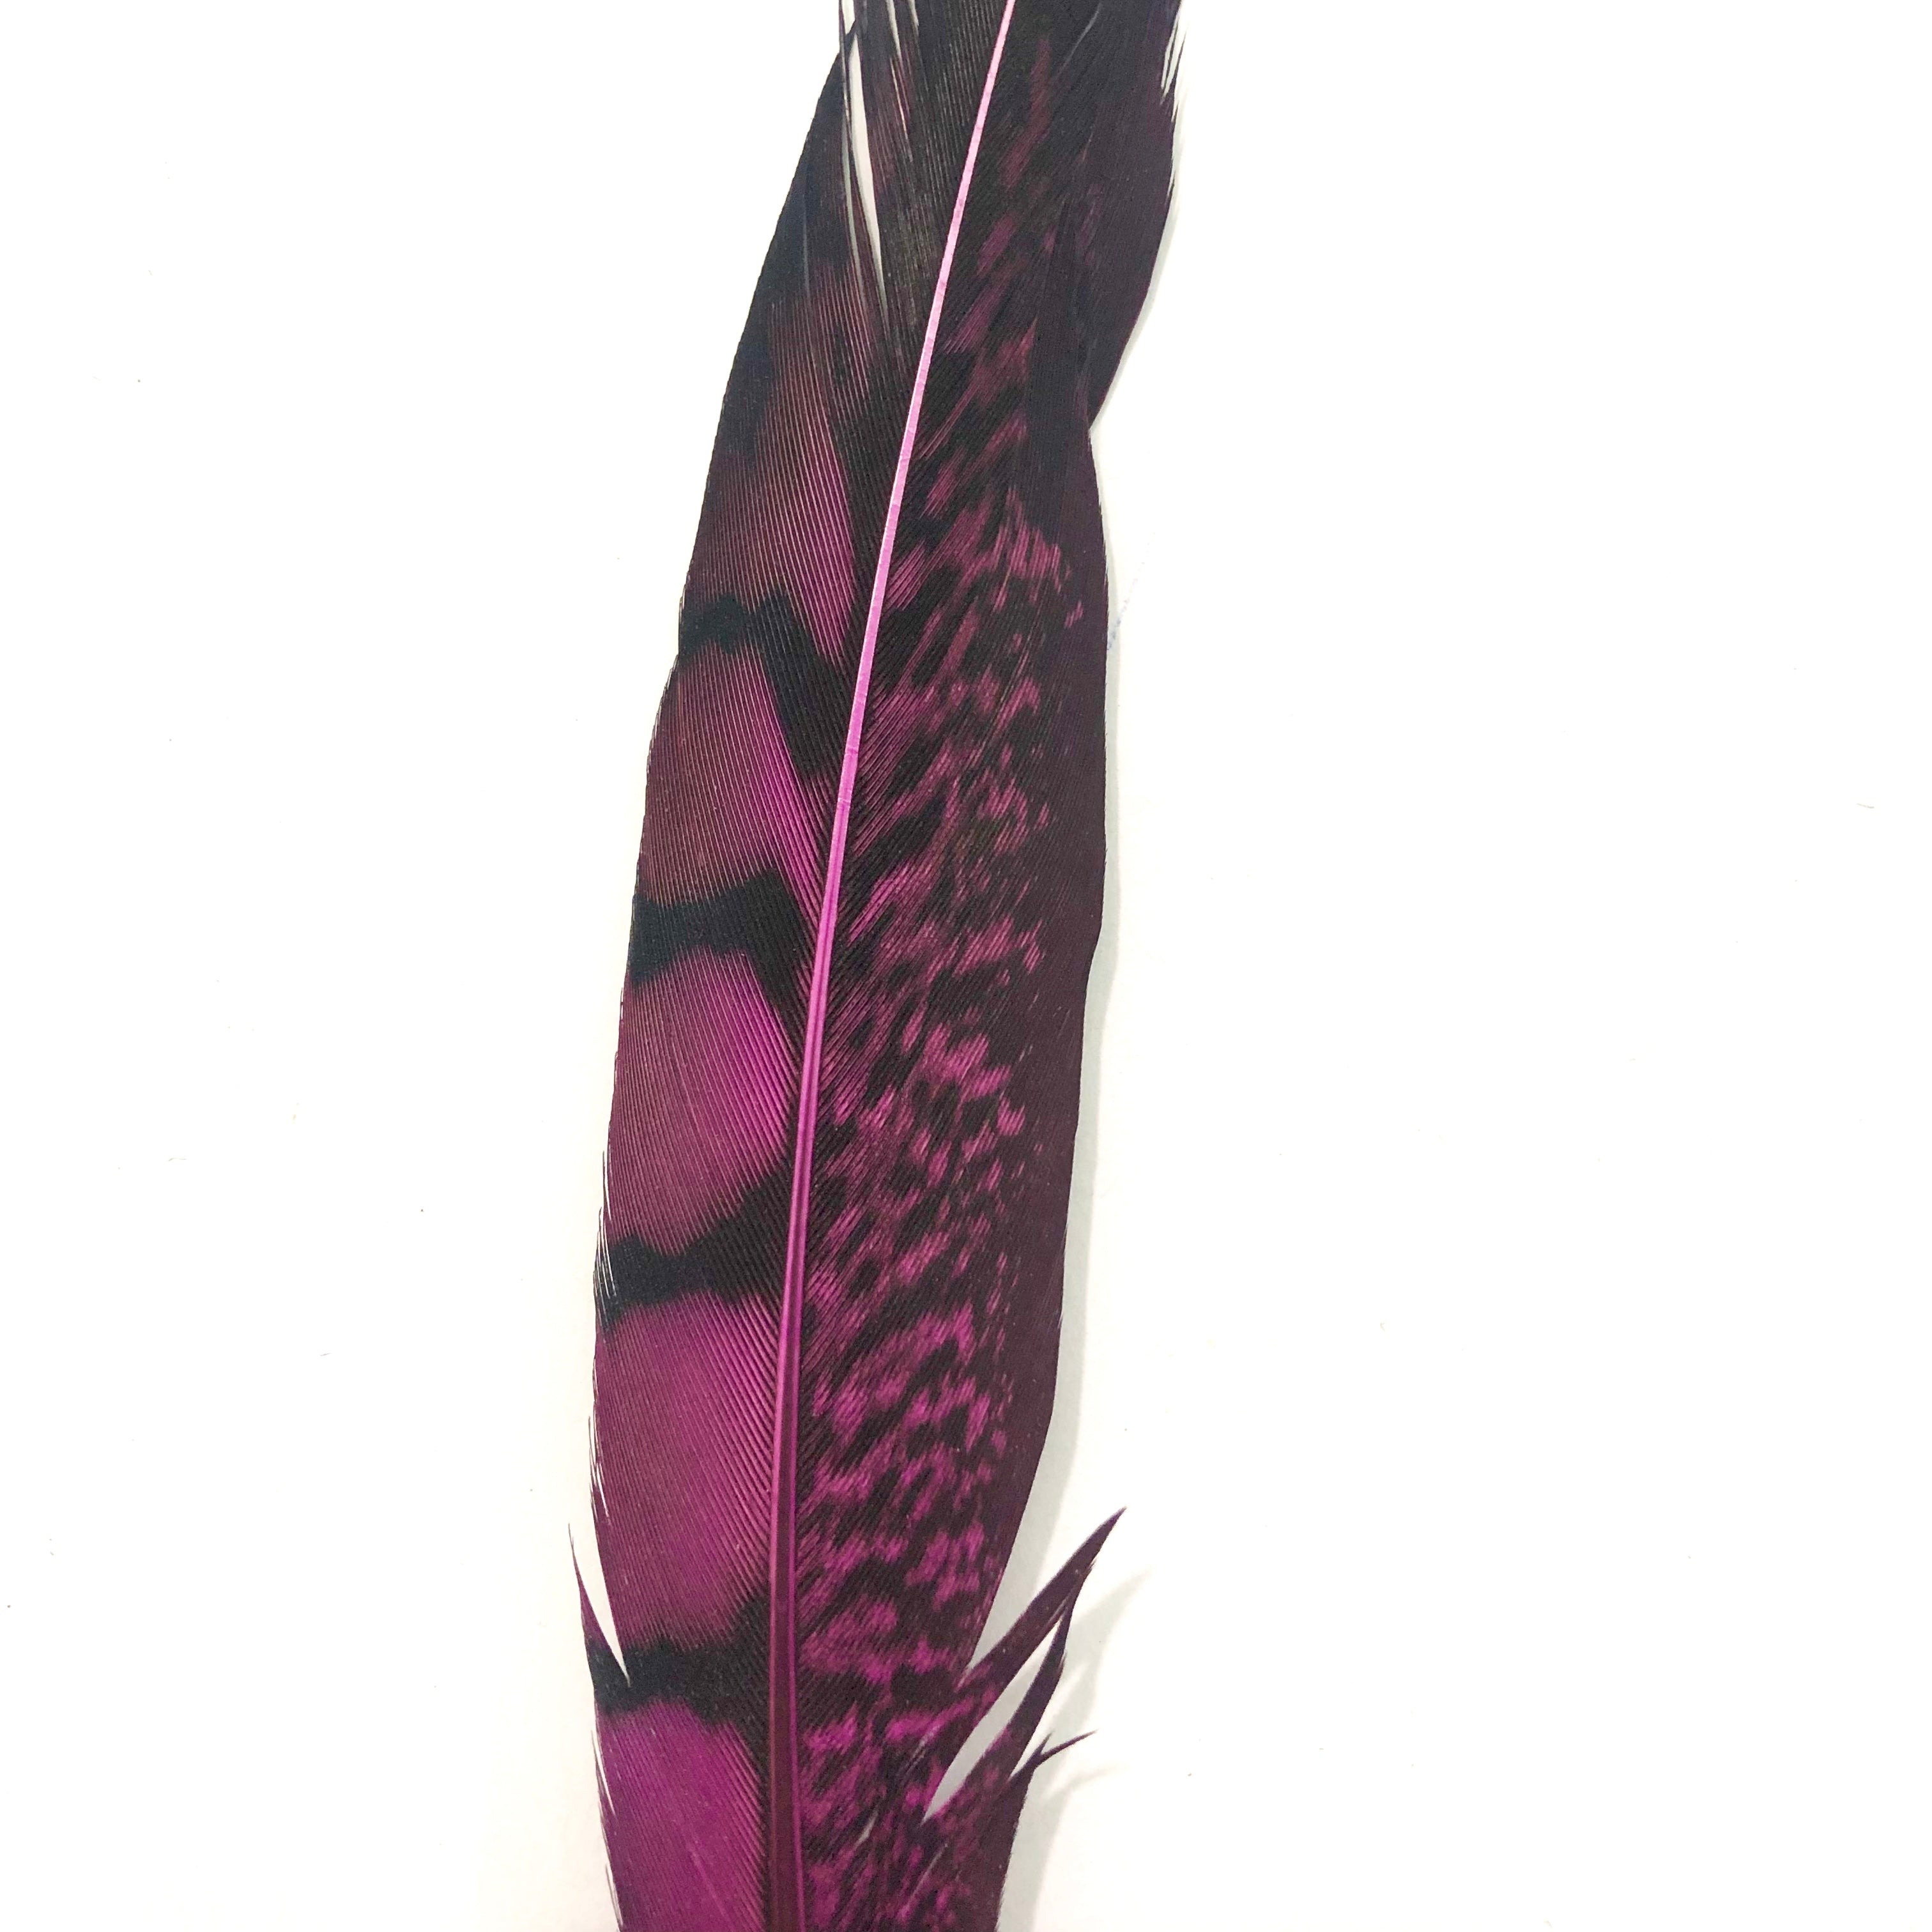 5" to 10" Lady Amherst Pheasant Side Tail Feather x 10 pcs - Hot Pink